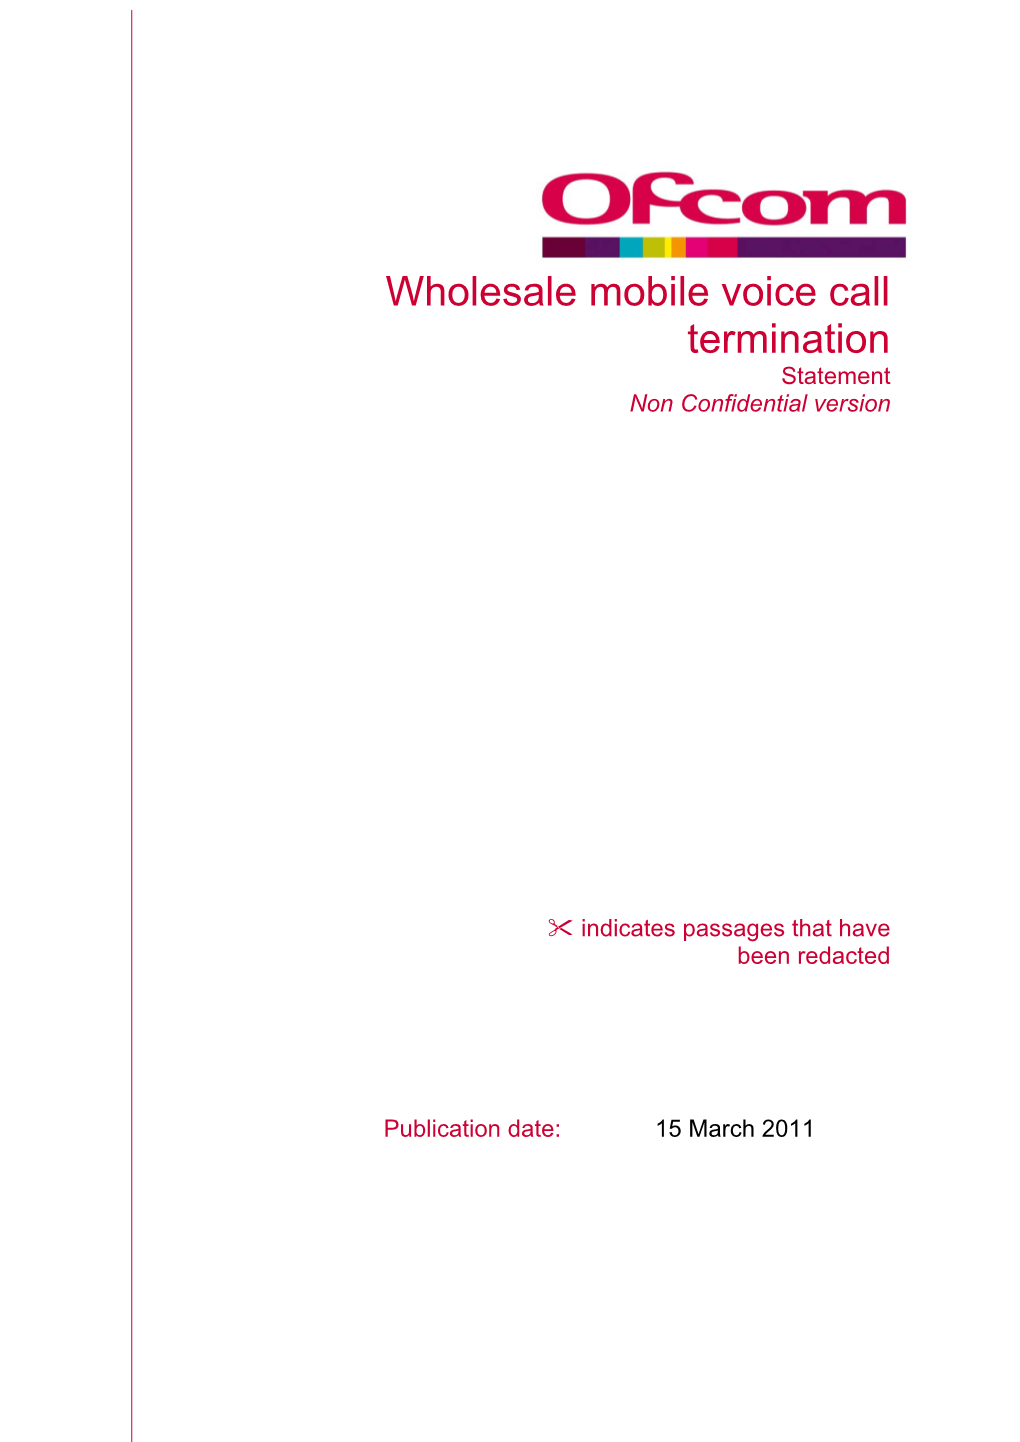 Statement: Wholesale Mobile Voice Call Termination